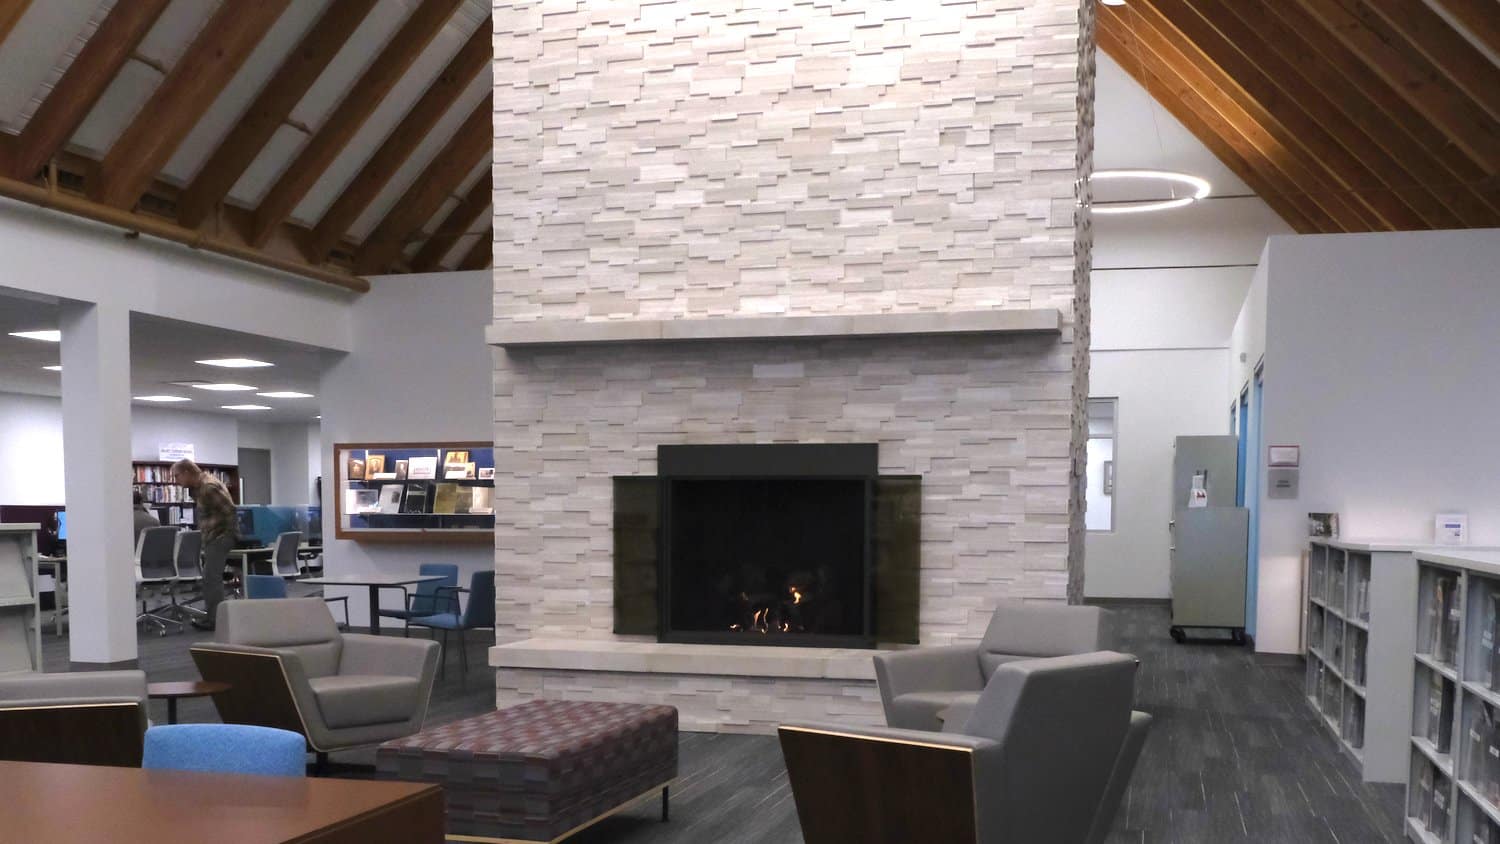 Two-sided fireplace at the library.